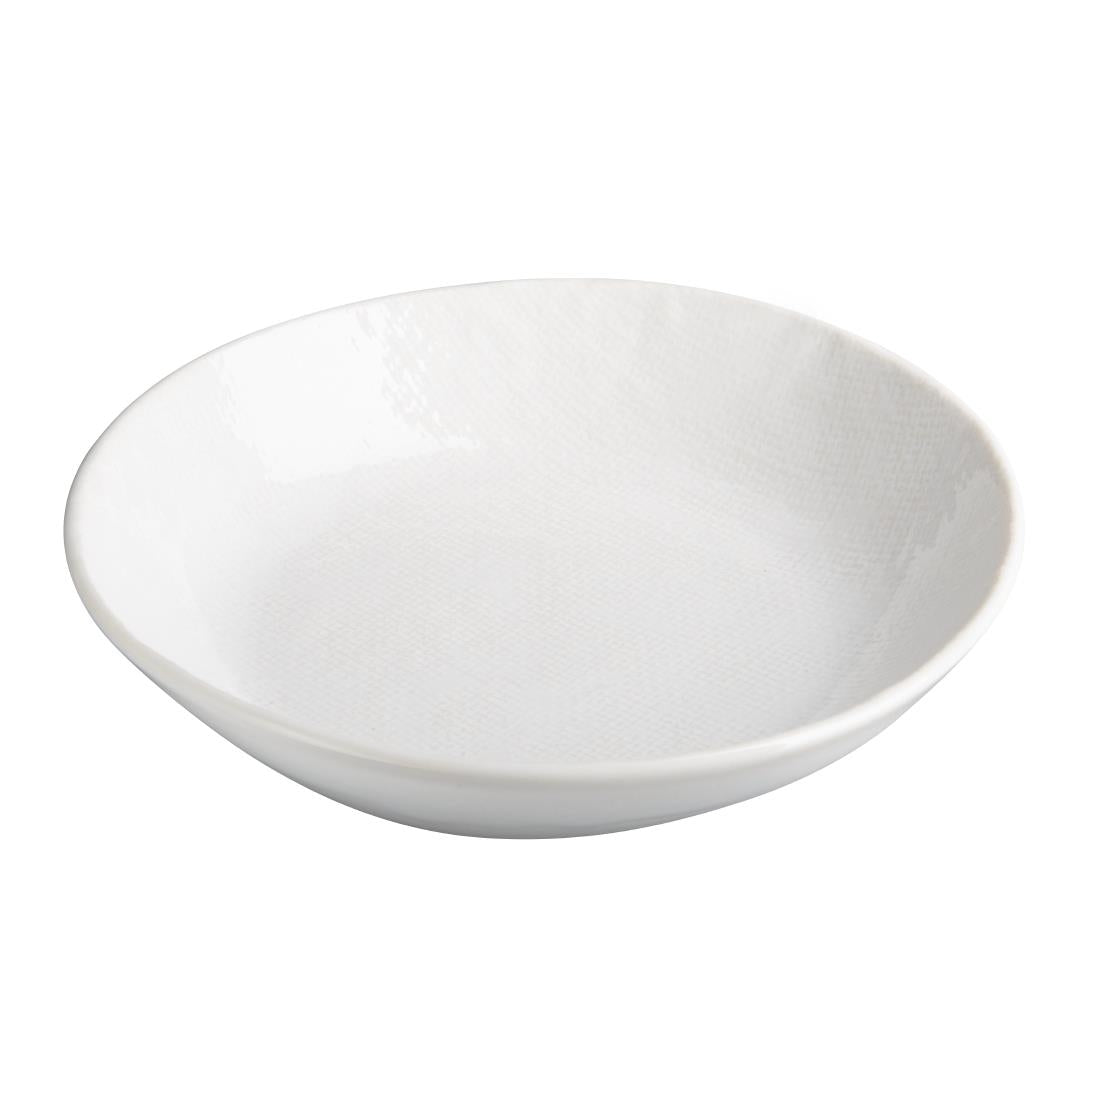 FU228 Olympia Denim White Coupe Bowls 220mm (Pack of 6)